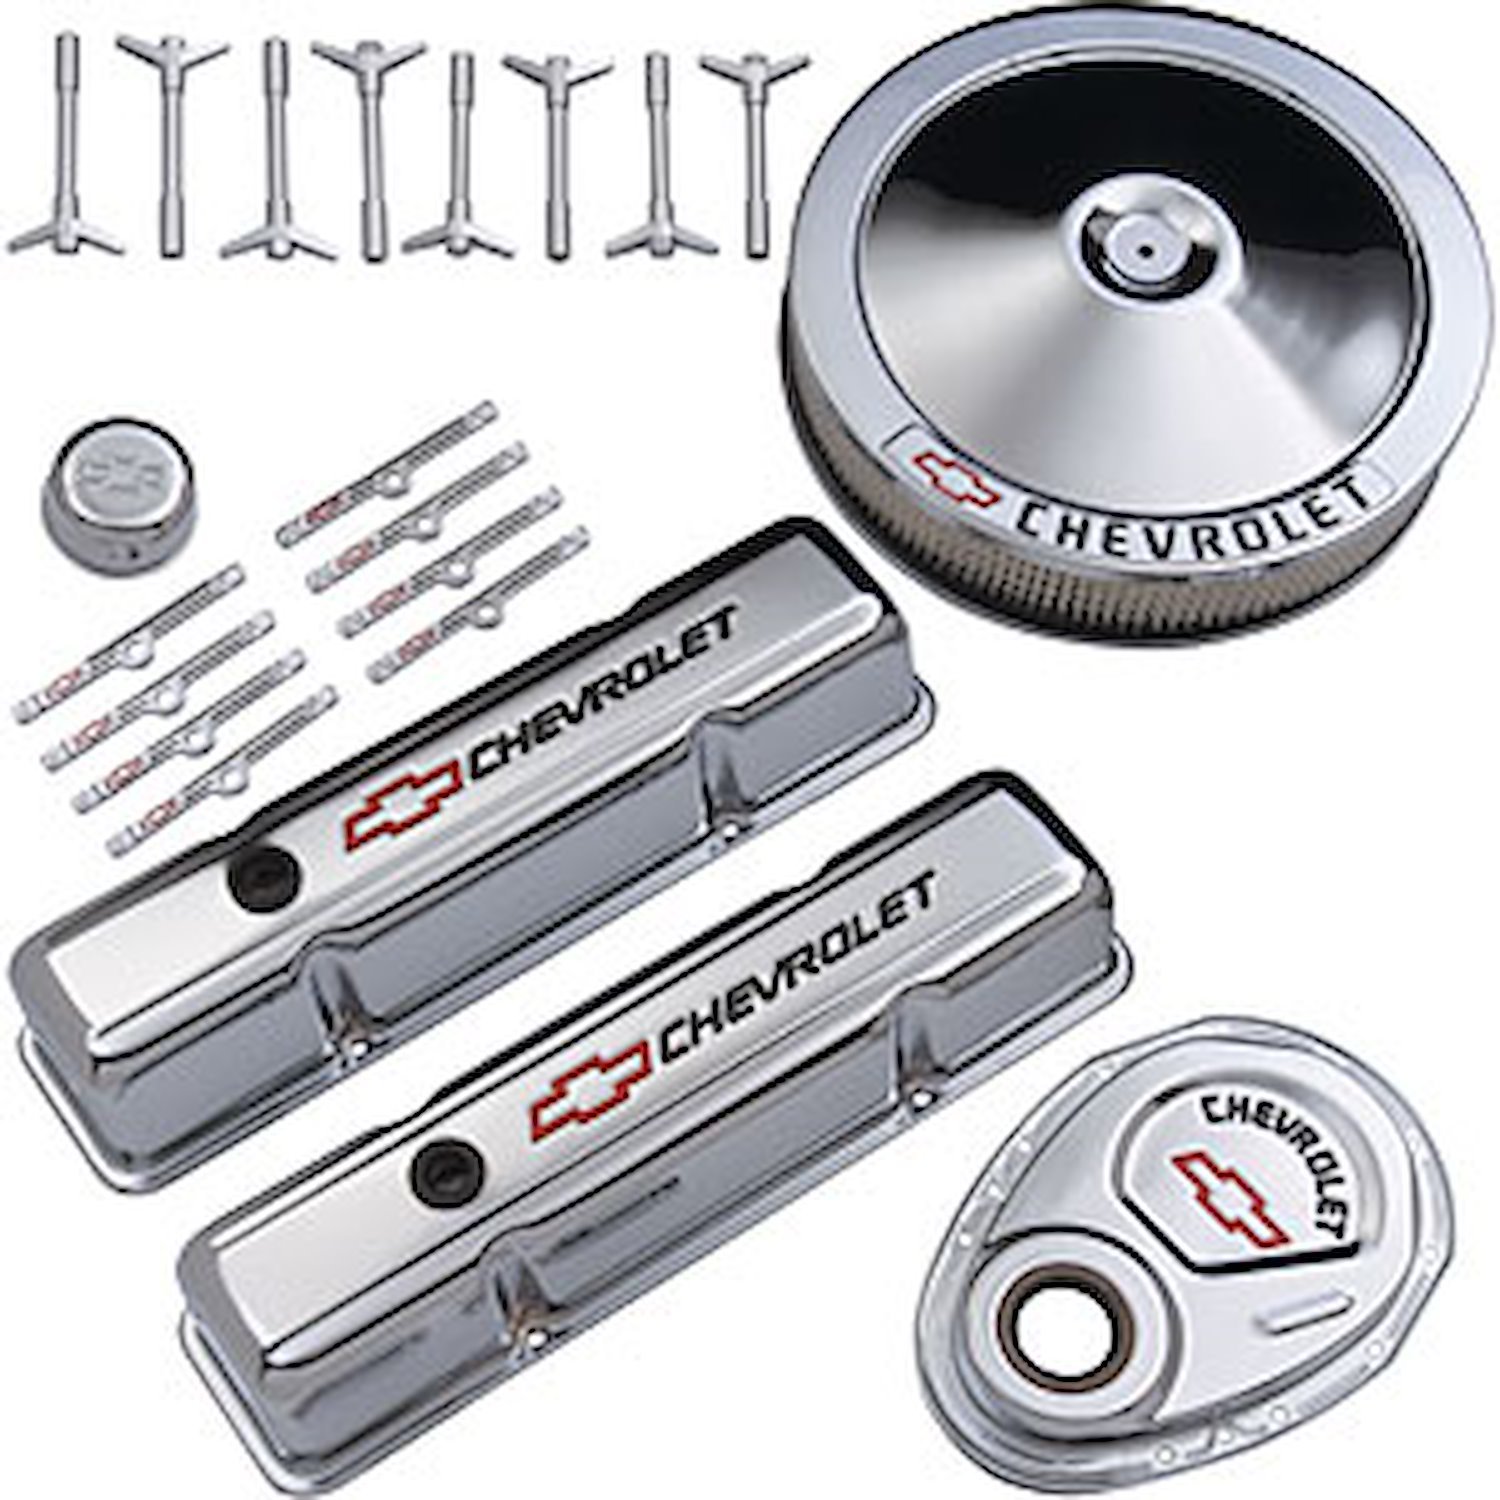 Chrome Engine Dress-up Kit for 1958-1986 Small Block Chevy with Chevrolet and Bowtie Emblems